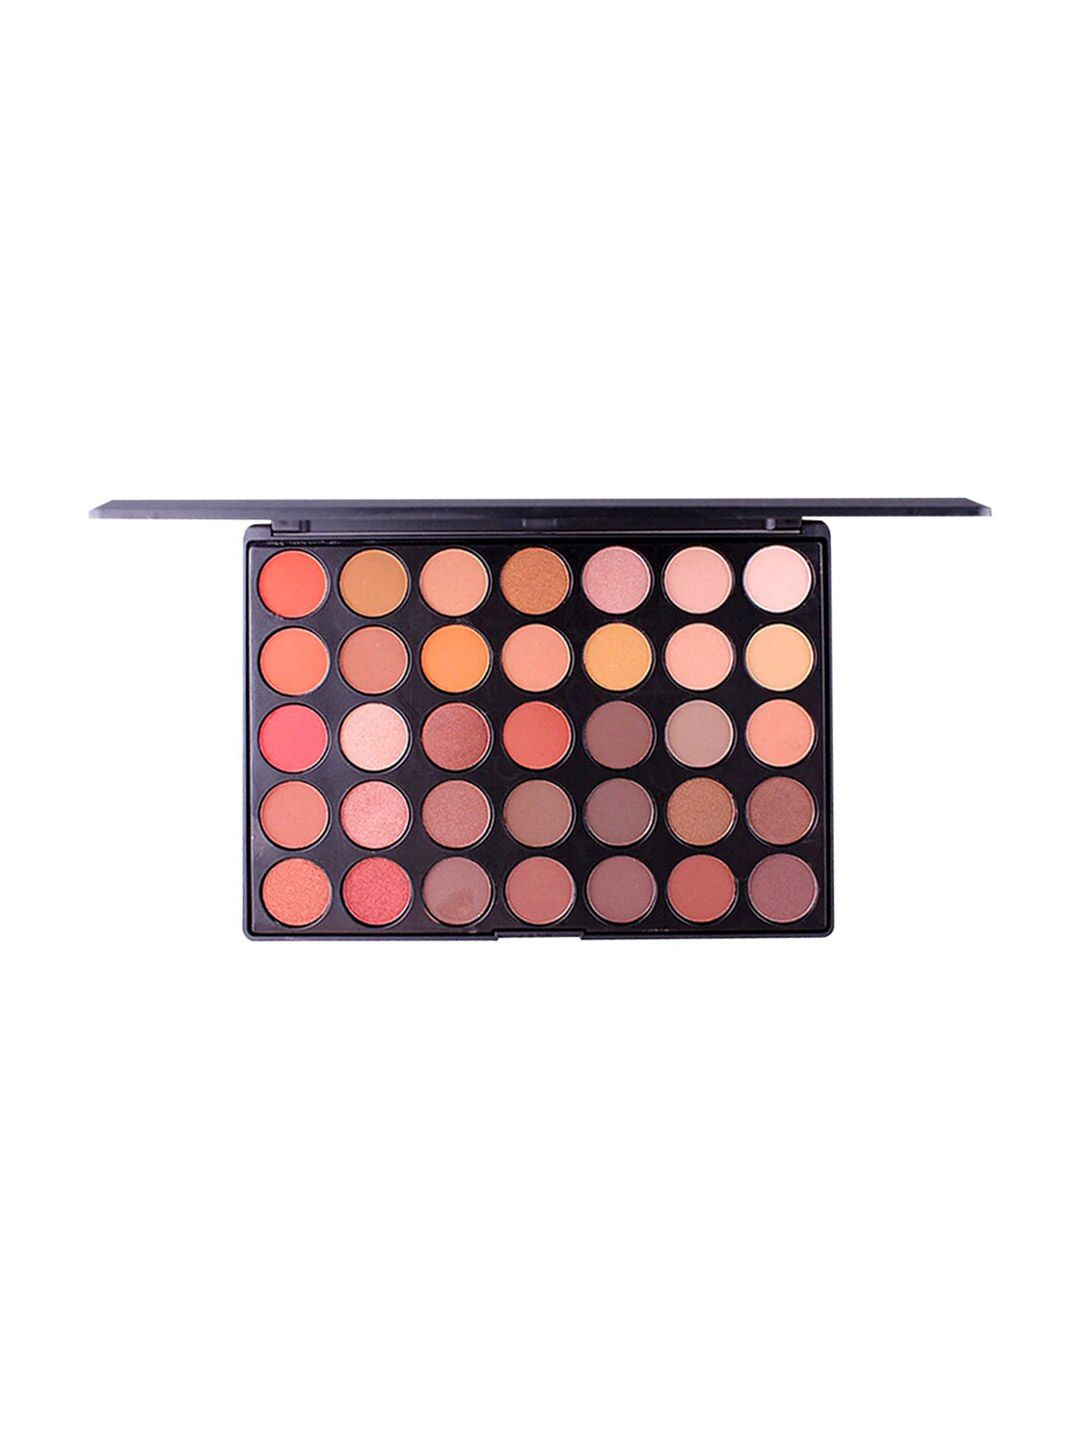 MISS ROSE Metalic 35 Color Matte Professional Eyeshadow Palette 7001-81 MY Price in India